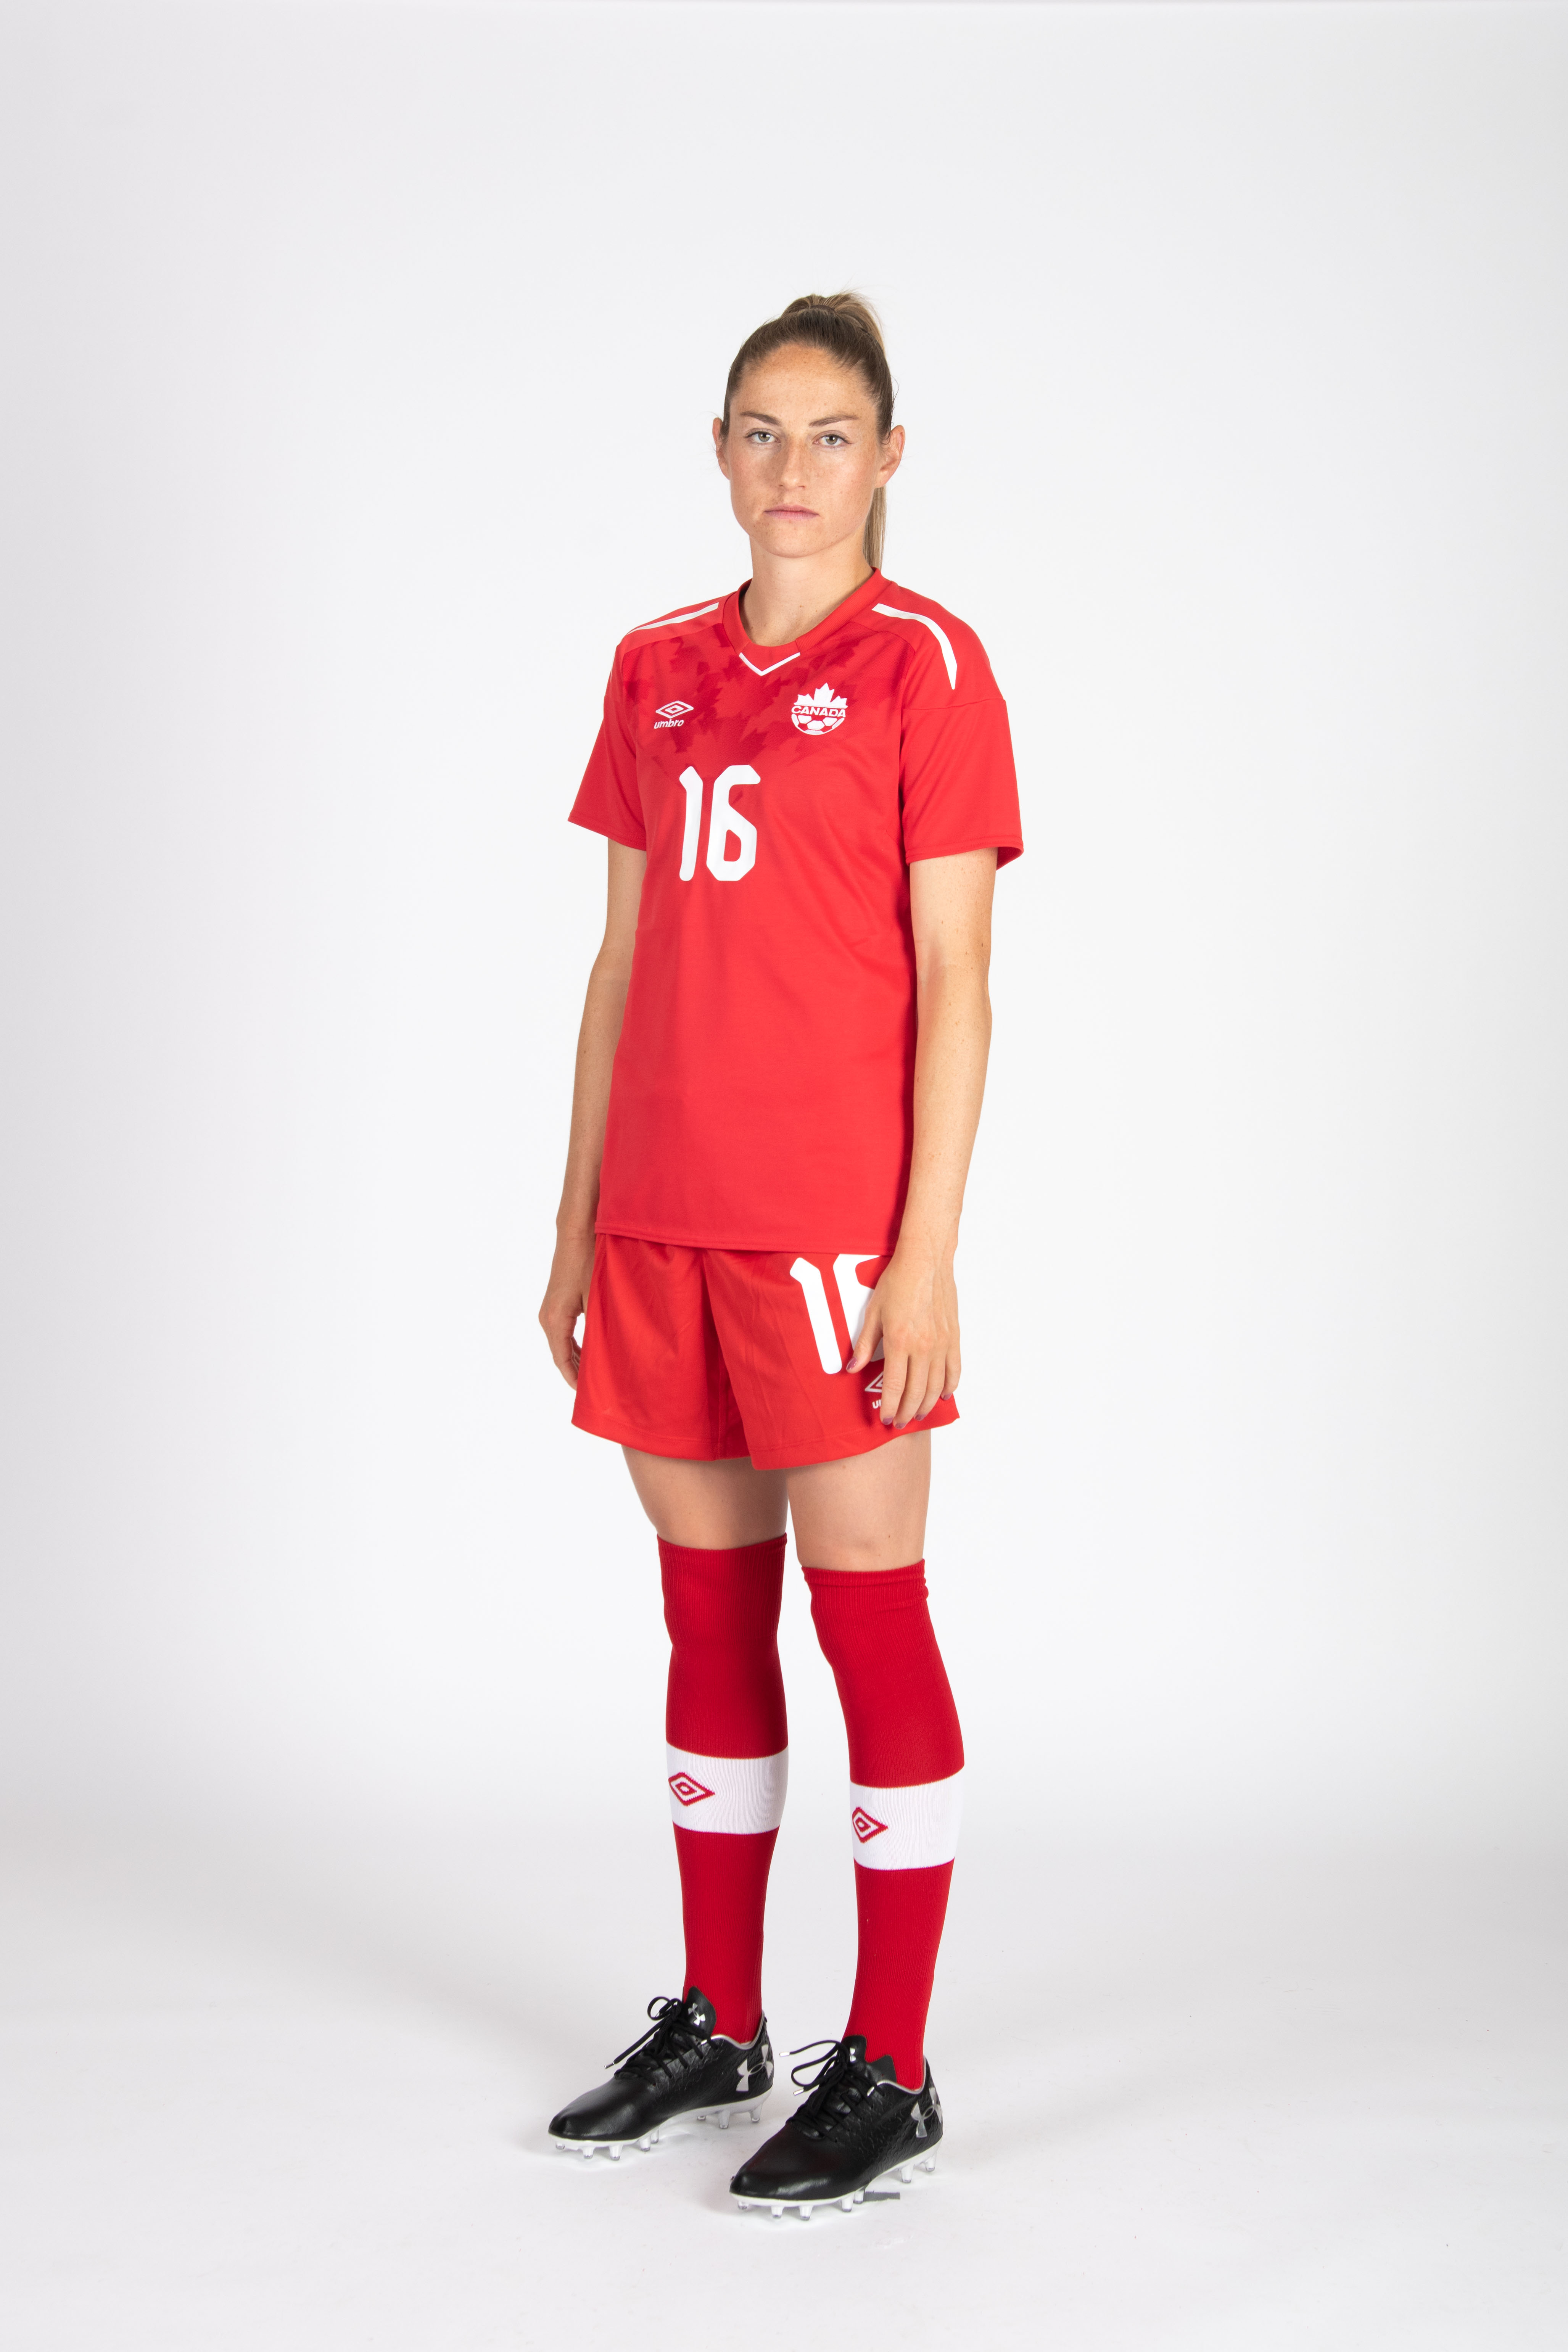 20180604_CANWNT_Beckie_byBazyl26